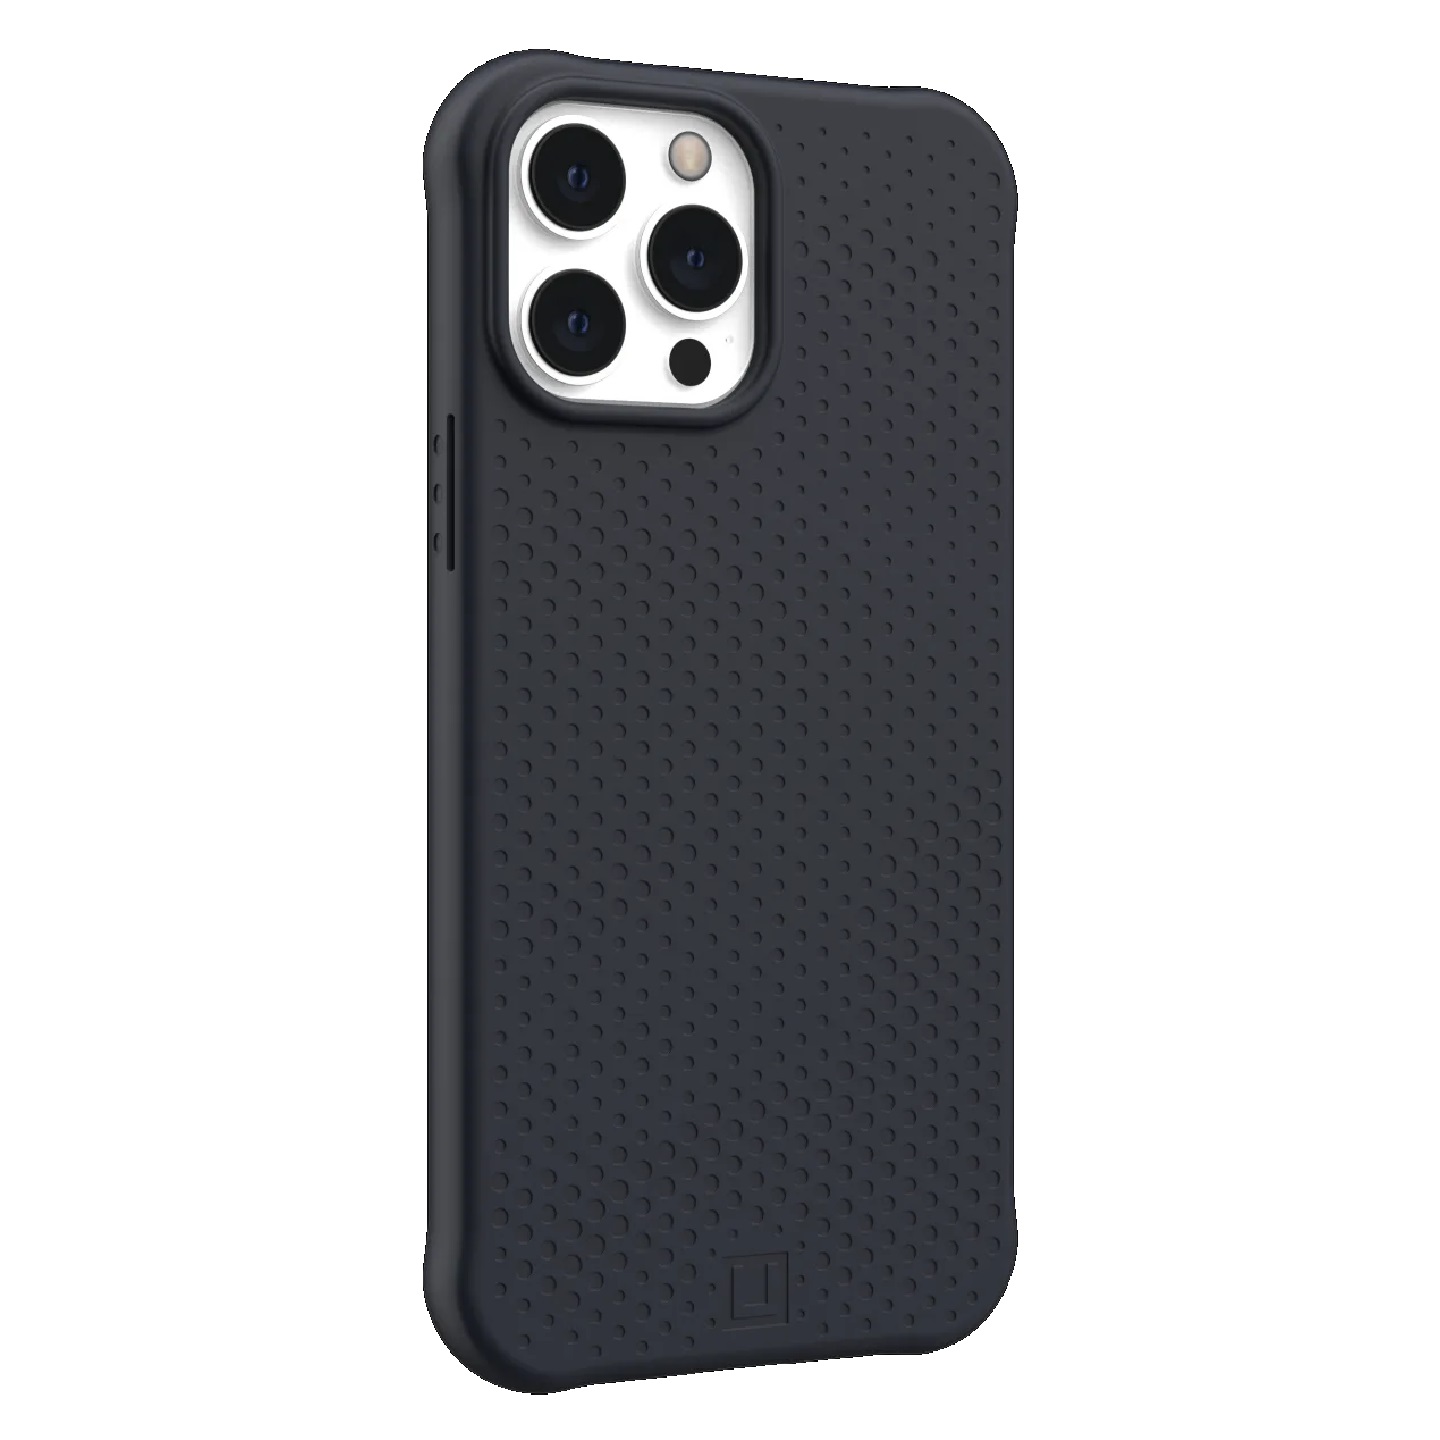 UAG [U] Dot Apple iPhone 13 Pro Max Case – Black (11316V314040), 16ft. Drop Protection (4.8M), Raised Screen Surround, Soft-Touch